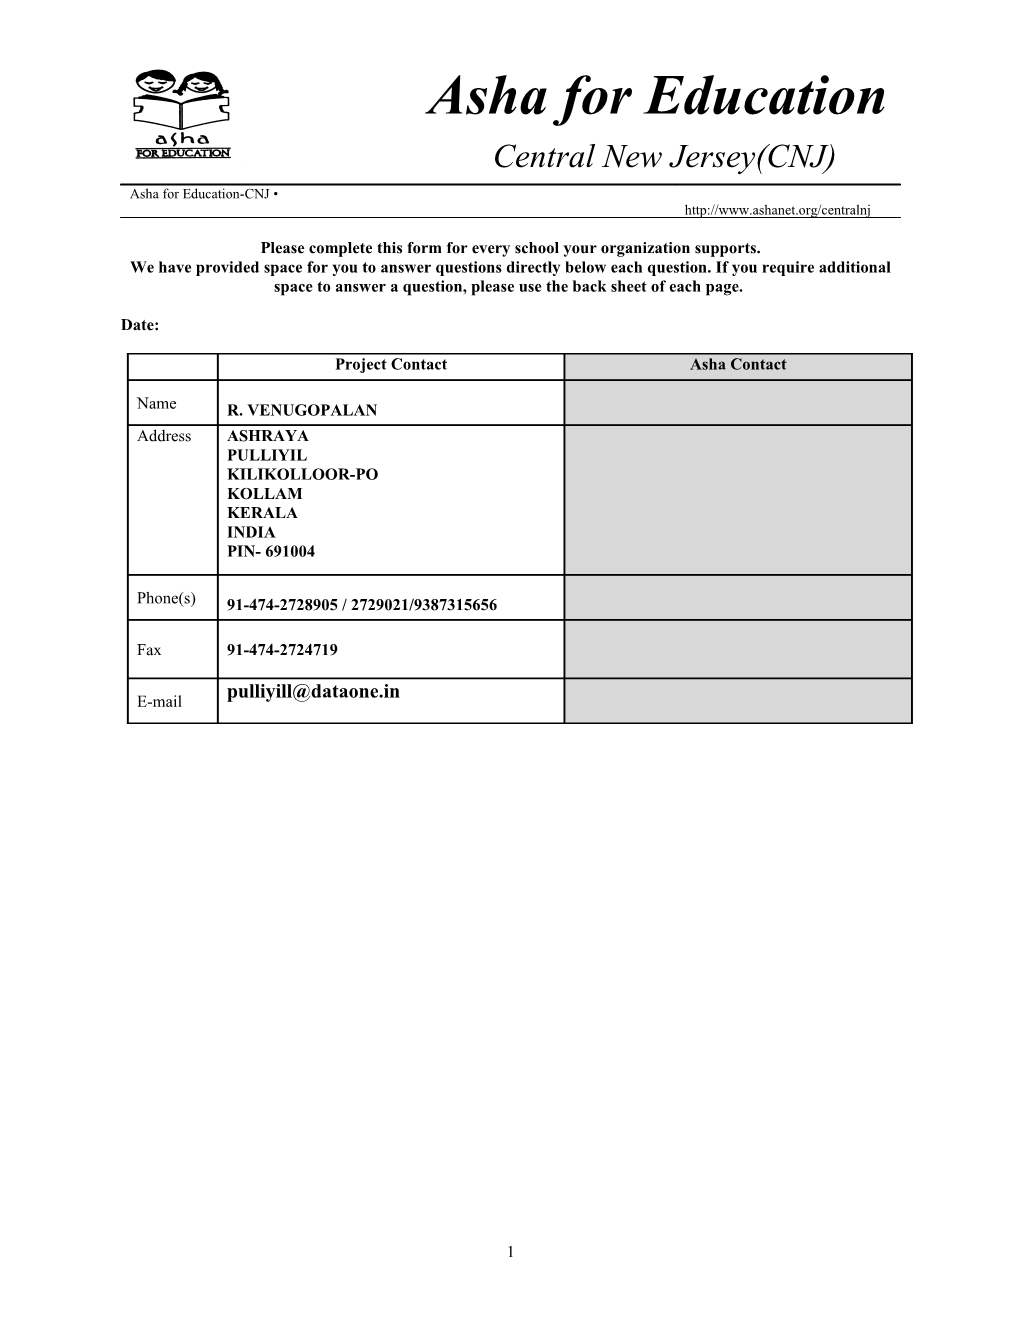 Please Complete This Form for Every School Your Organization Supports